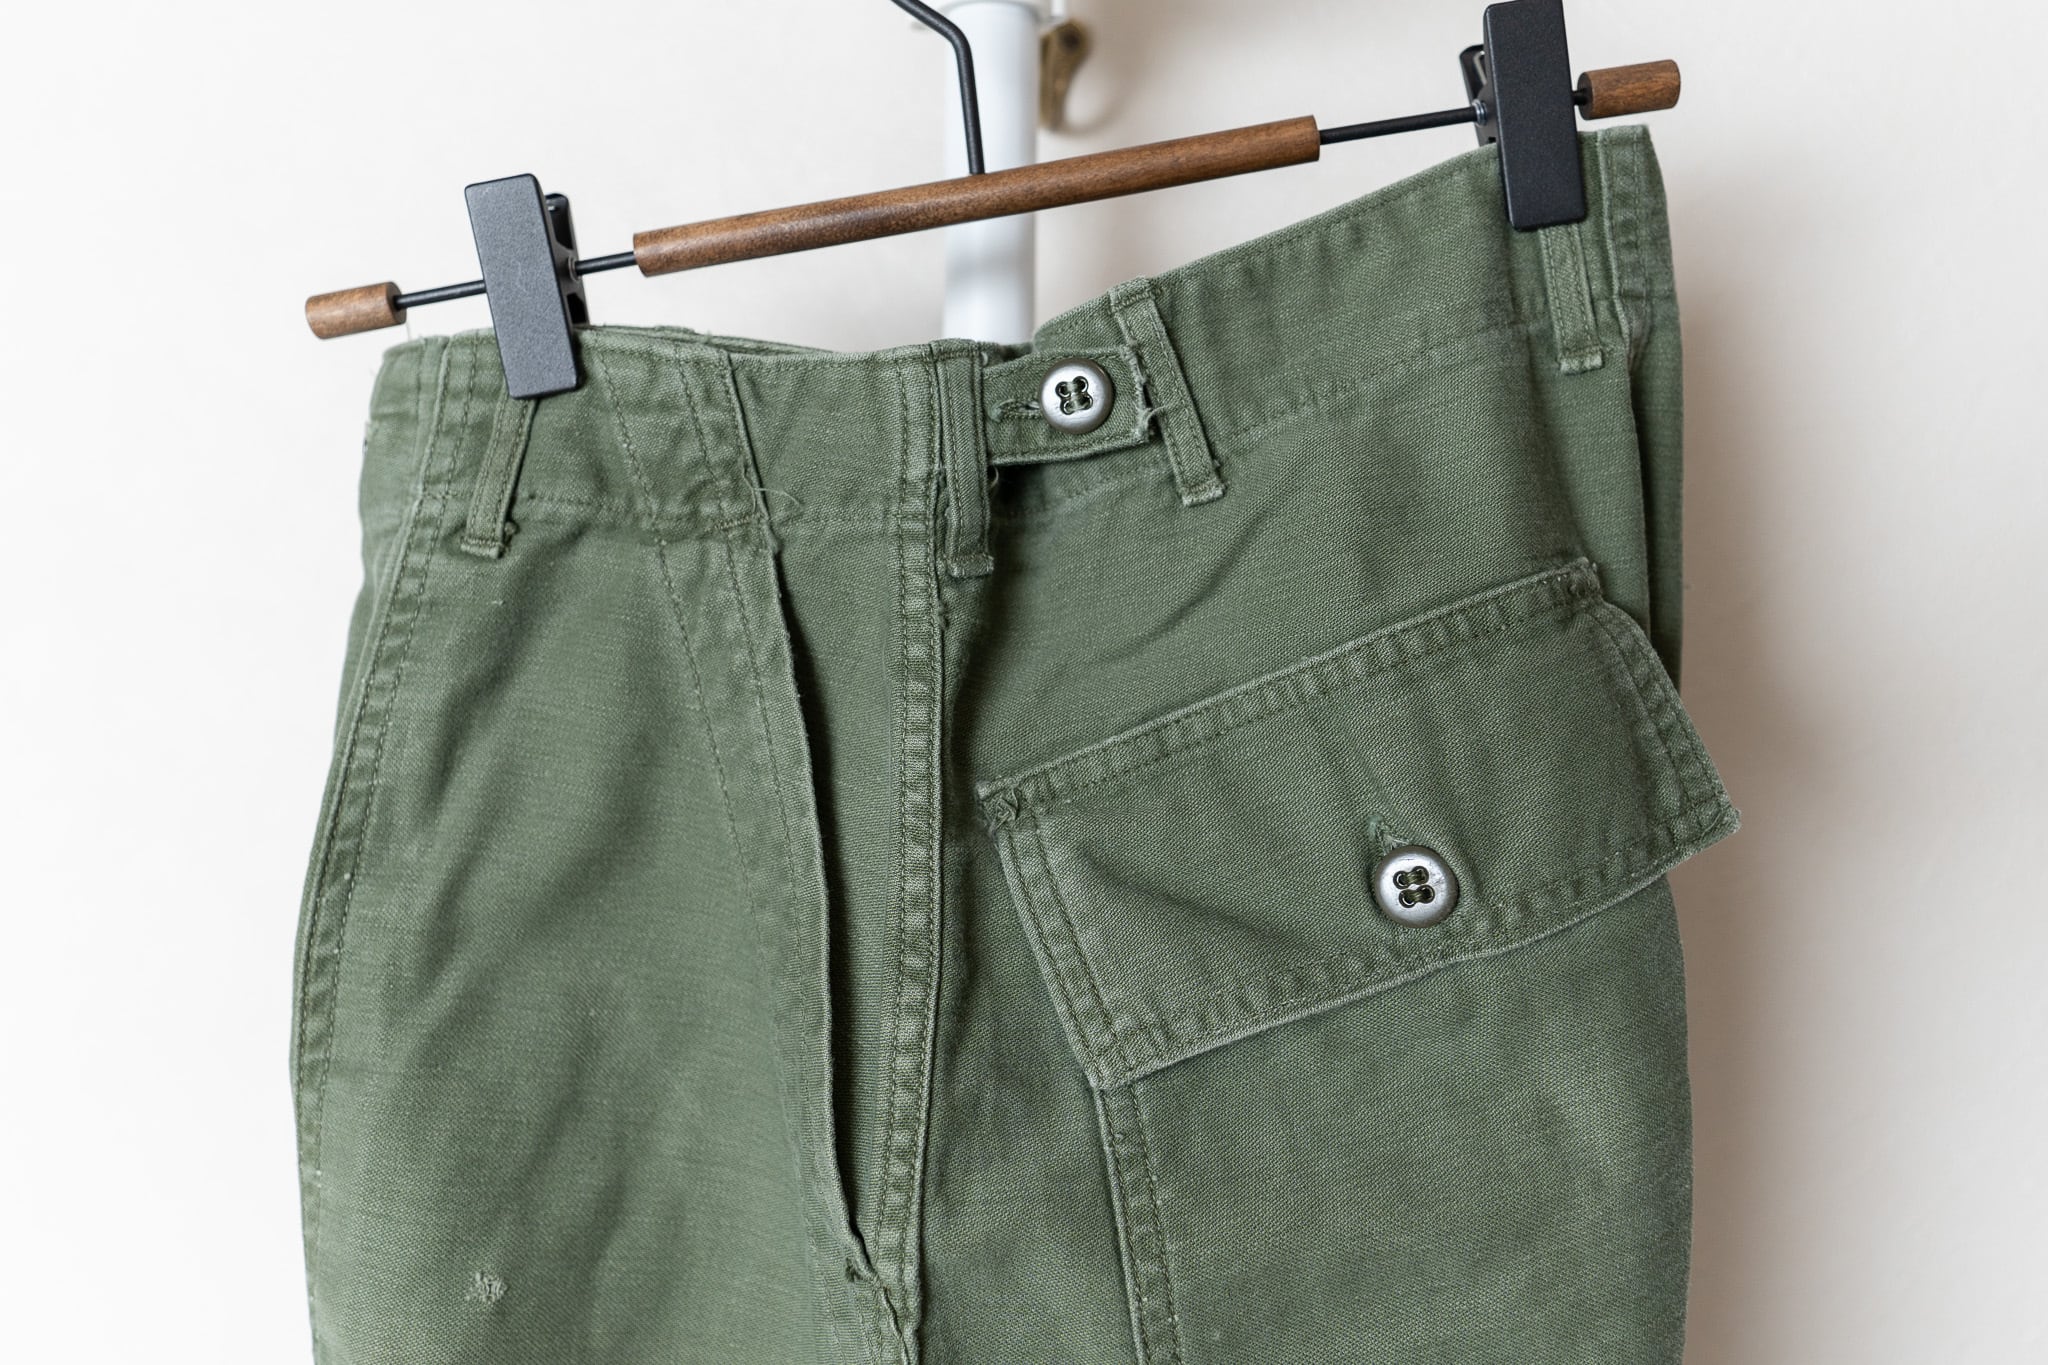 SMALL】U.S.Army Utility Trousers OG-107 実物 米軍 ベイカーパンツ 